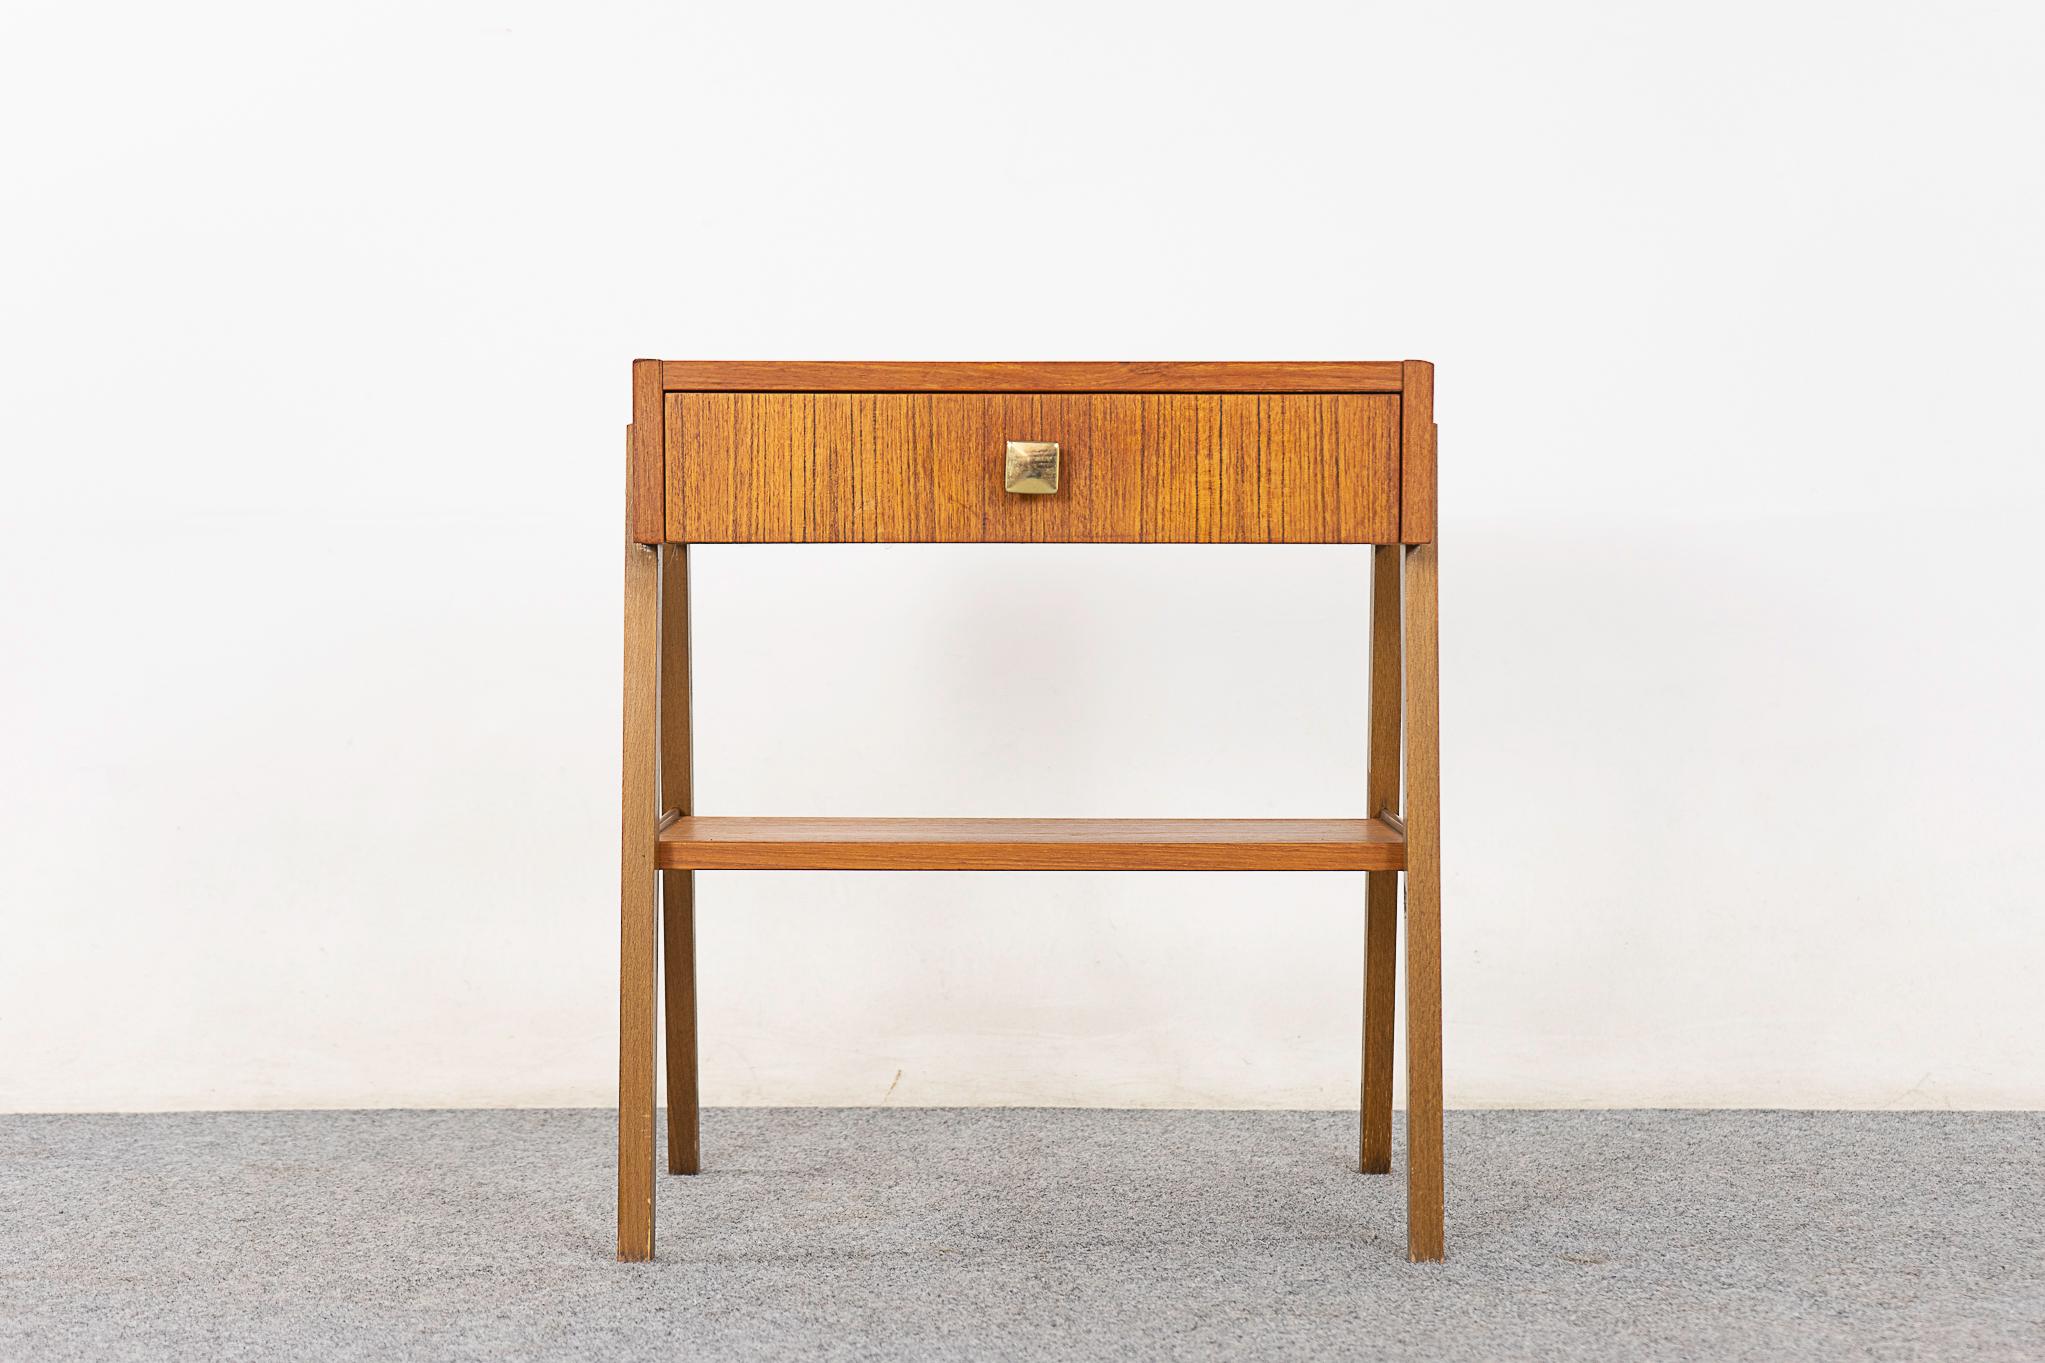 Teak Danish bedside table, circa 1960's. Eye catching scissor legs, sleek drawer and a handy shelf. Veneered case and drawer face with lovely grain patterning.

Please inquire for remote and international shipping rates.